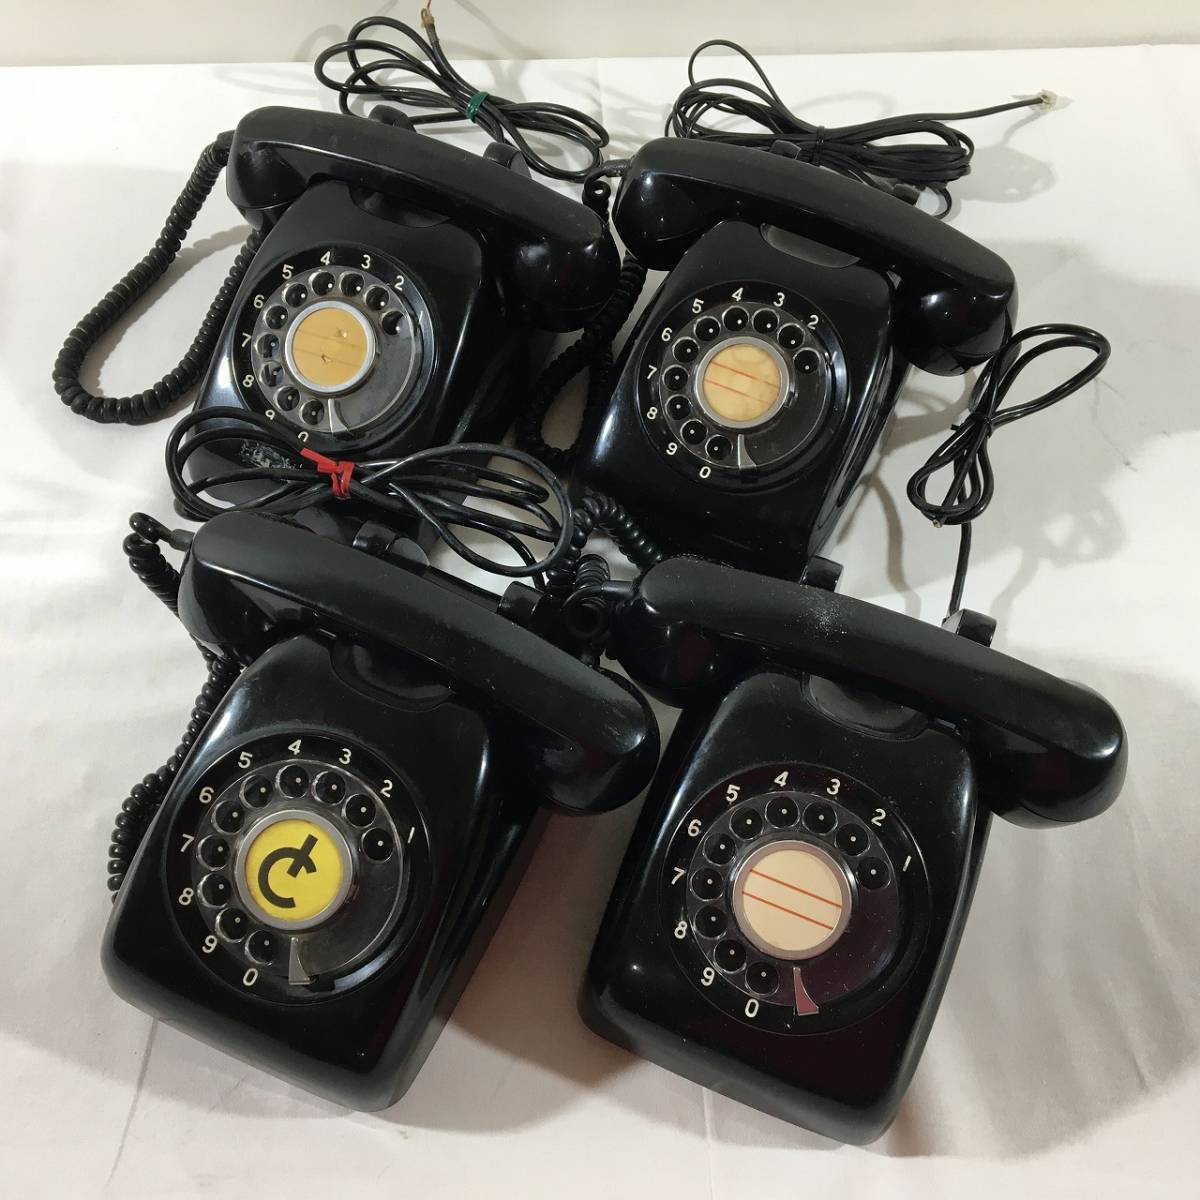 9-41/ black telephone 4 point together 600-A2×4 point 1984 year,1978 year made Showa Retro that time thing 